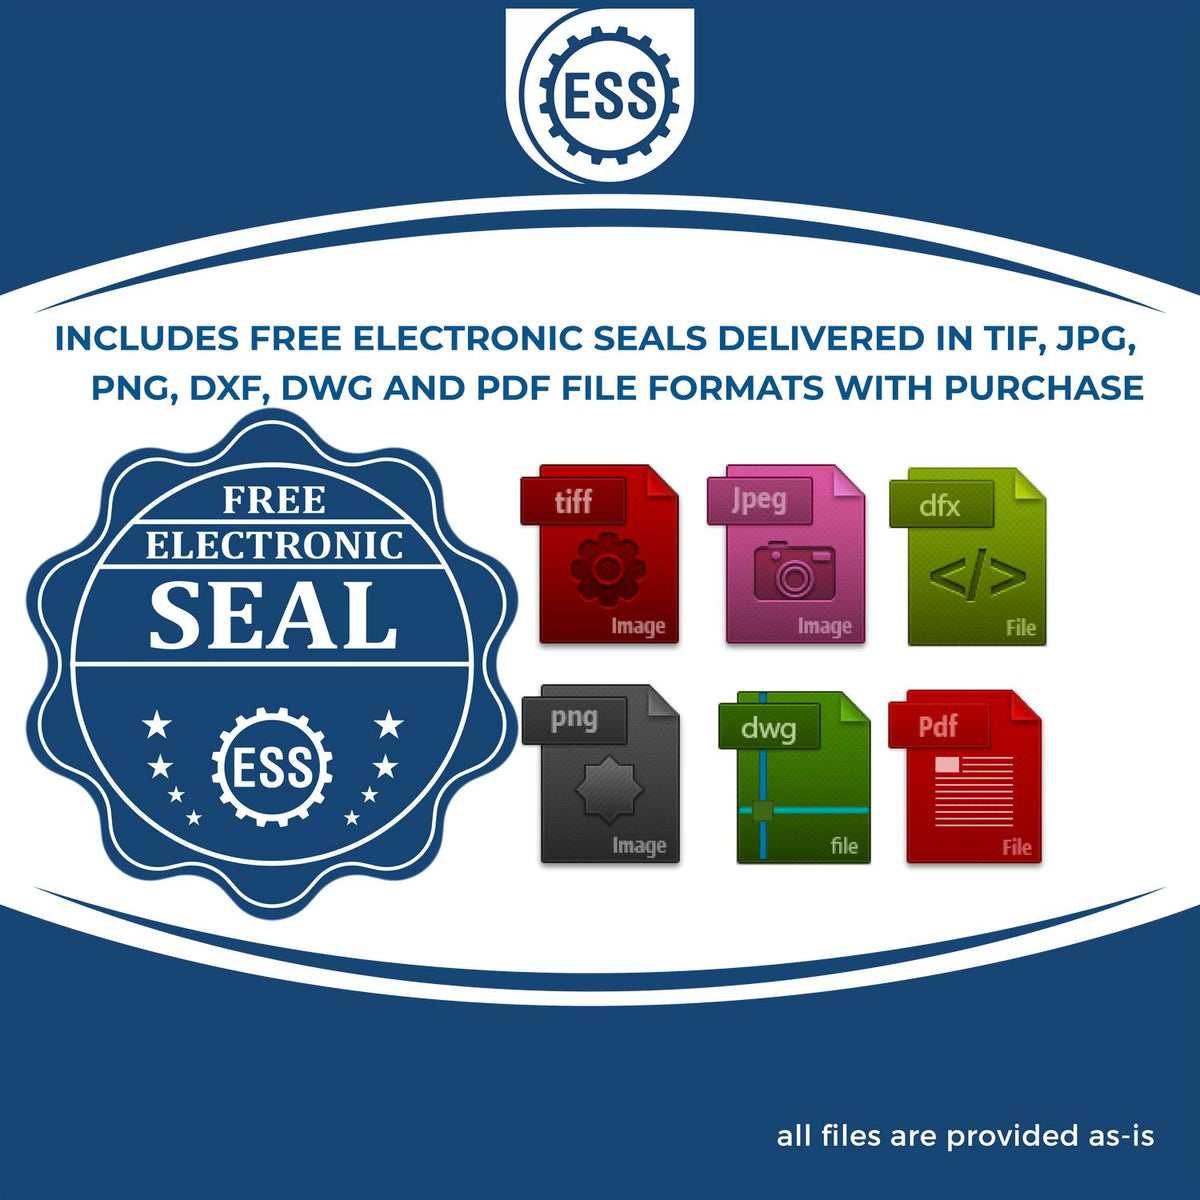 An infographic for the free electronic seal for the Heavy-Duty Wyoming Rectangular Notary Stamp illustrating the different file type icons such as DXF, DWG, TIF, JPG and PNG.